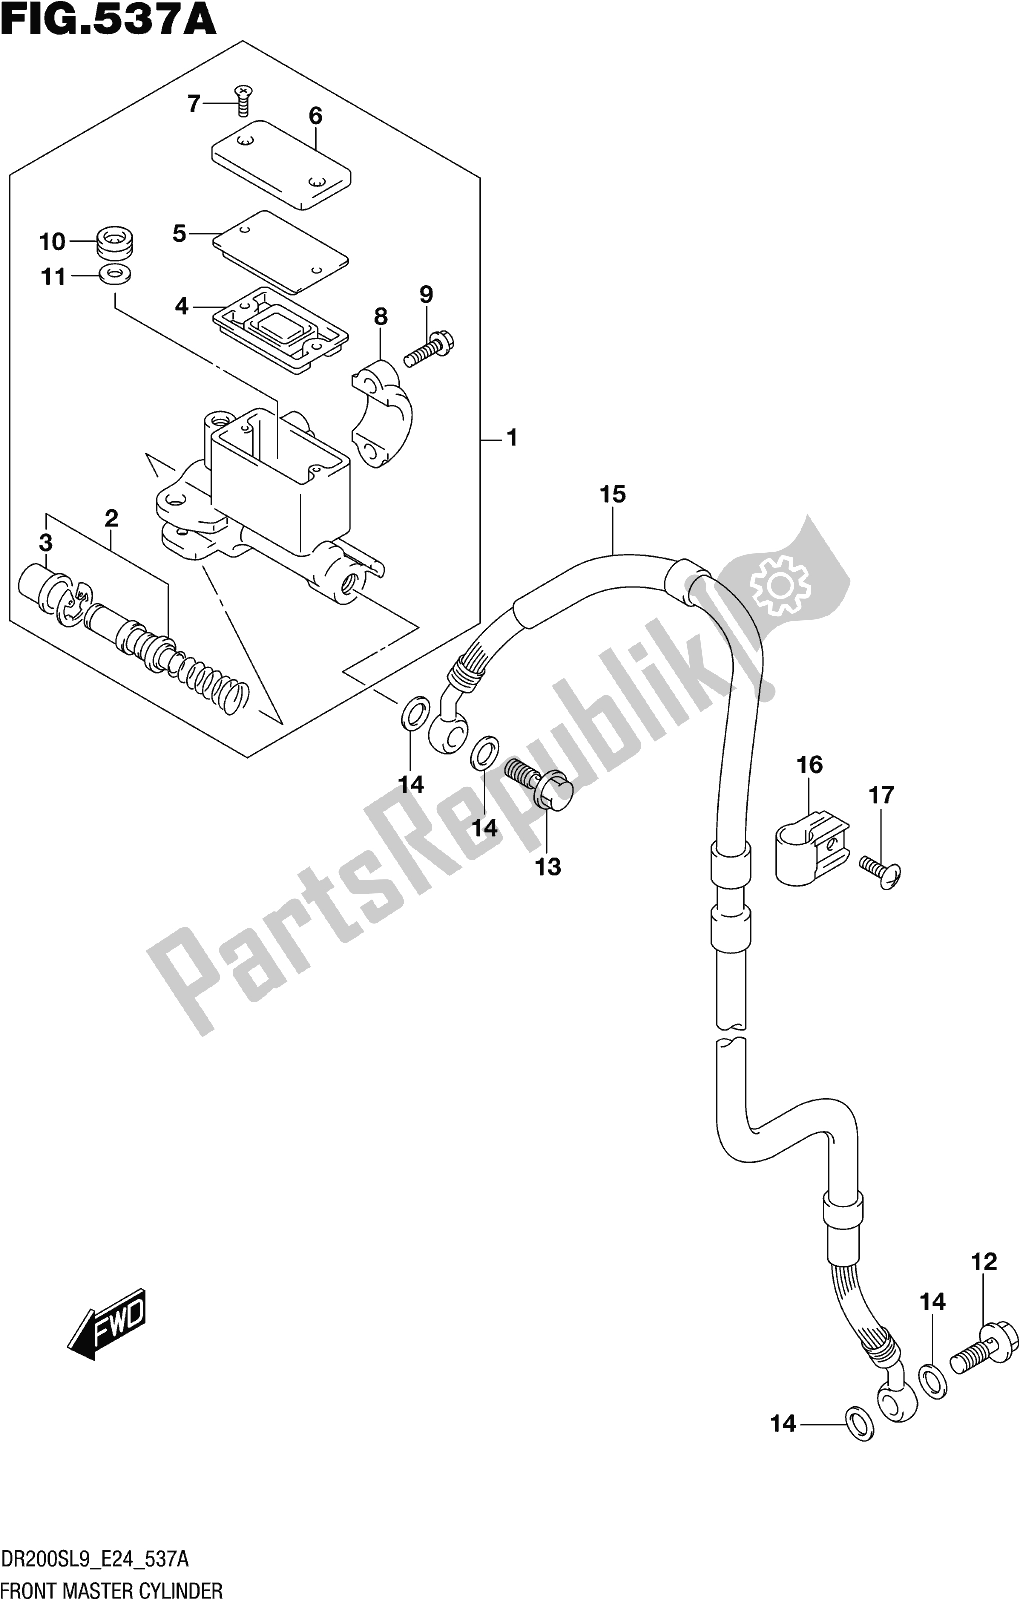 All parts for the Fig. 537a Front Master Cylinder of the Suzuki DR 200S 2019